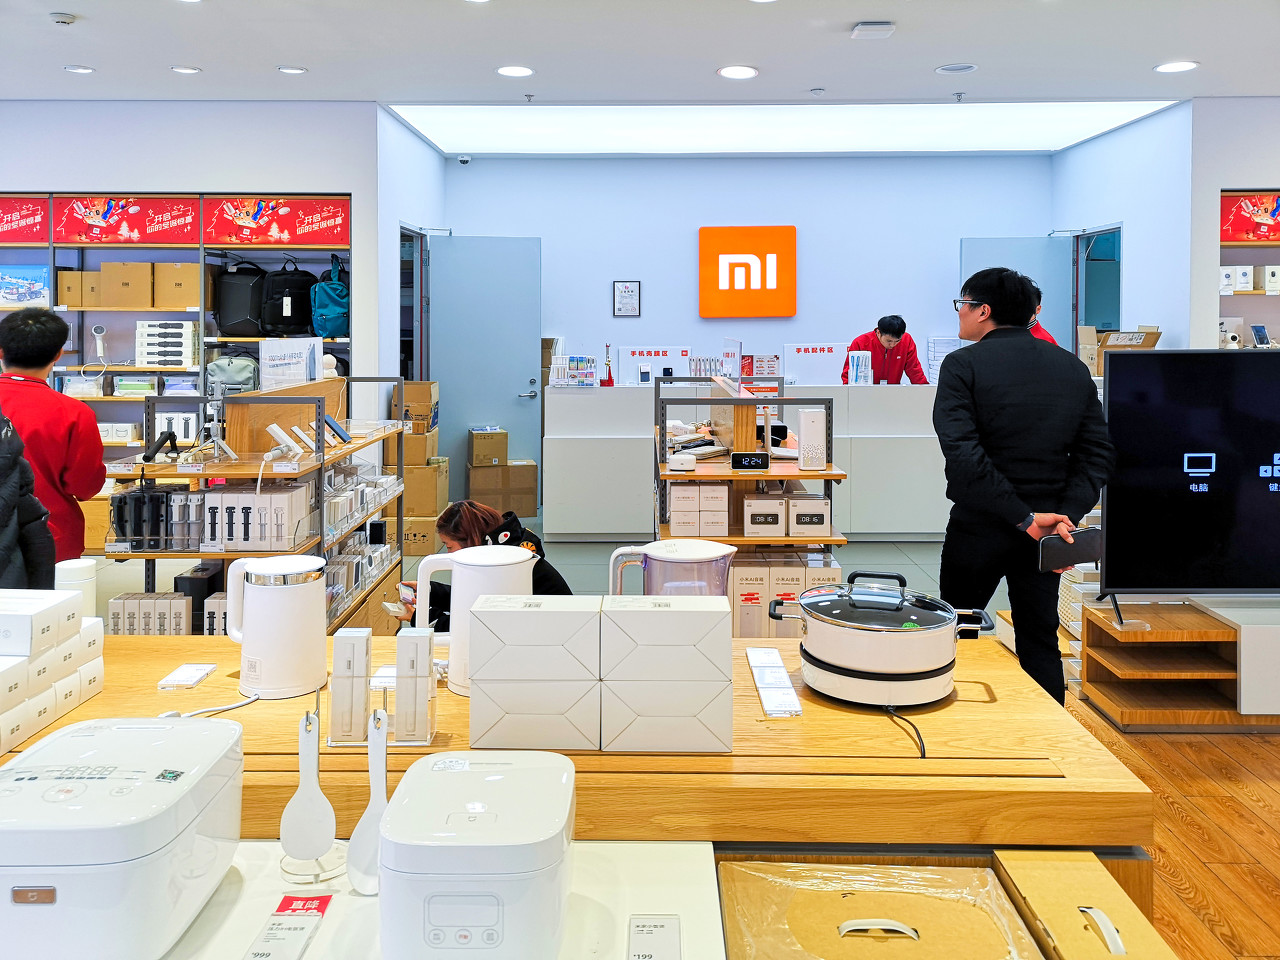 Xiaomi wants to beat Huawei abroad, but it’s losing ground at home